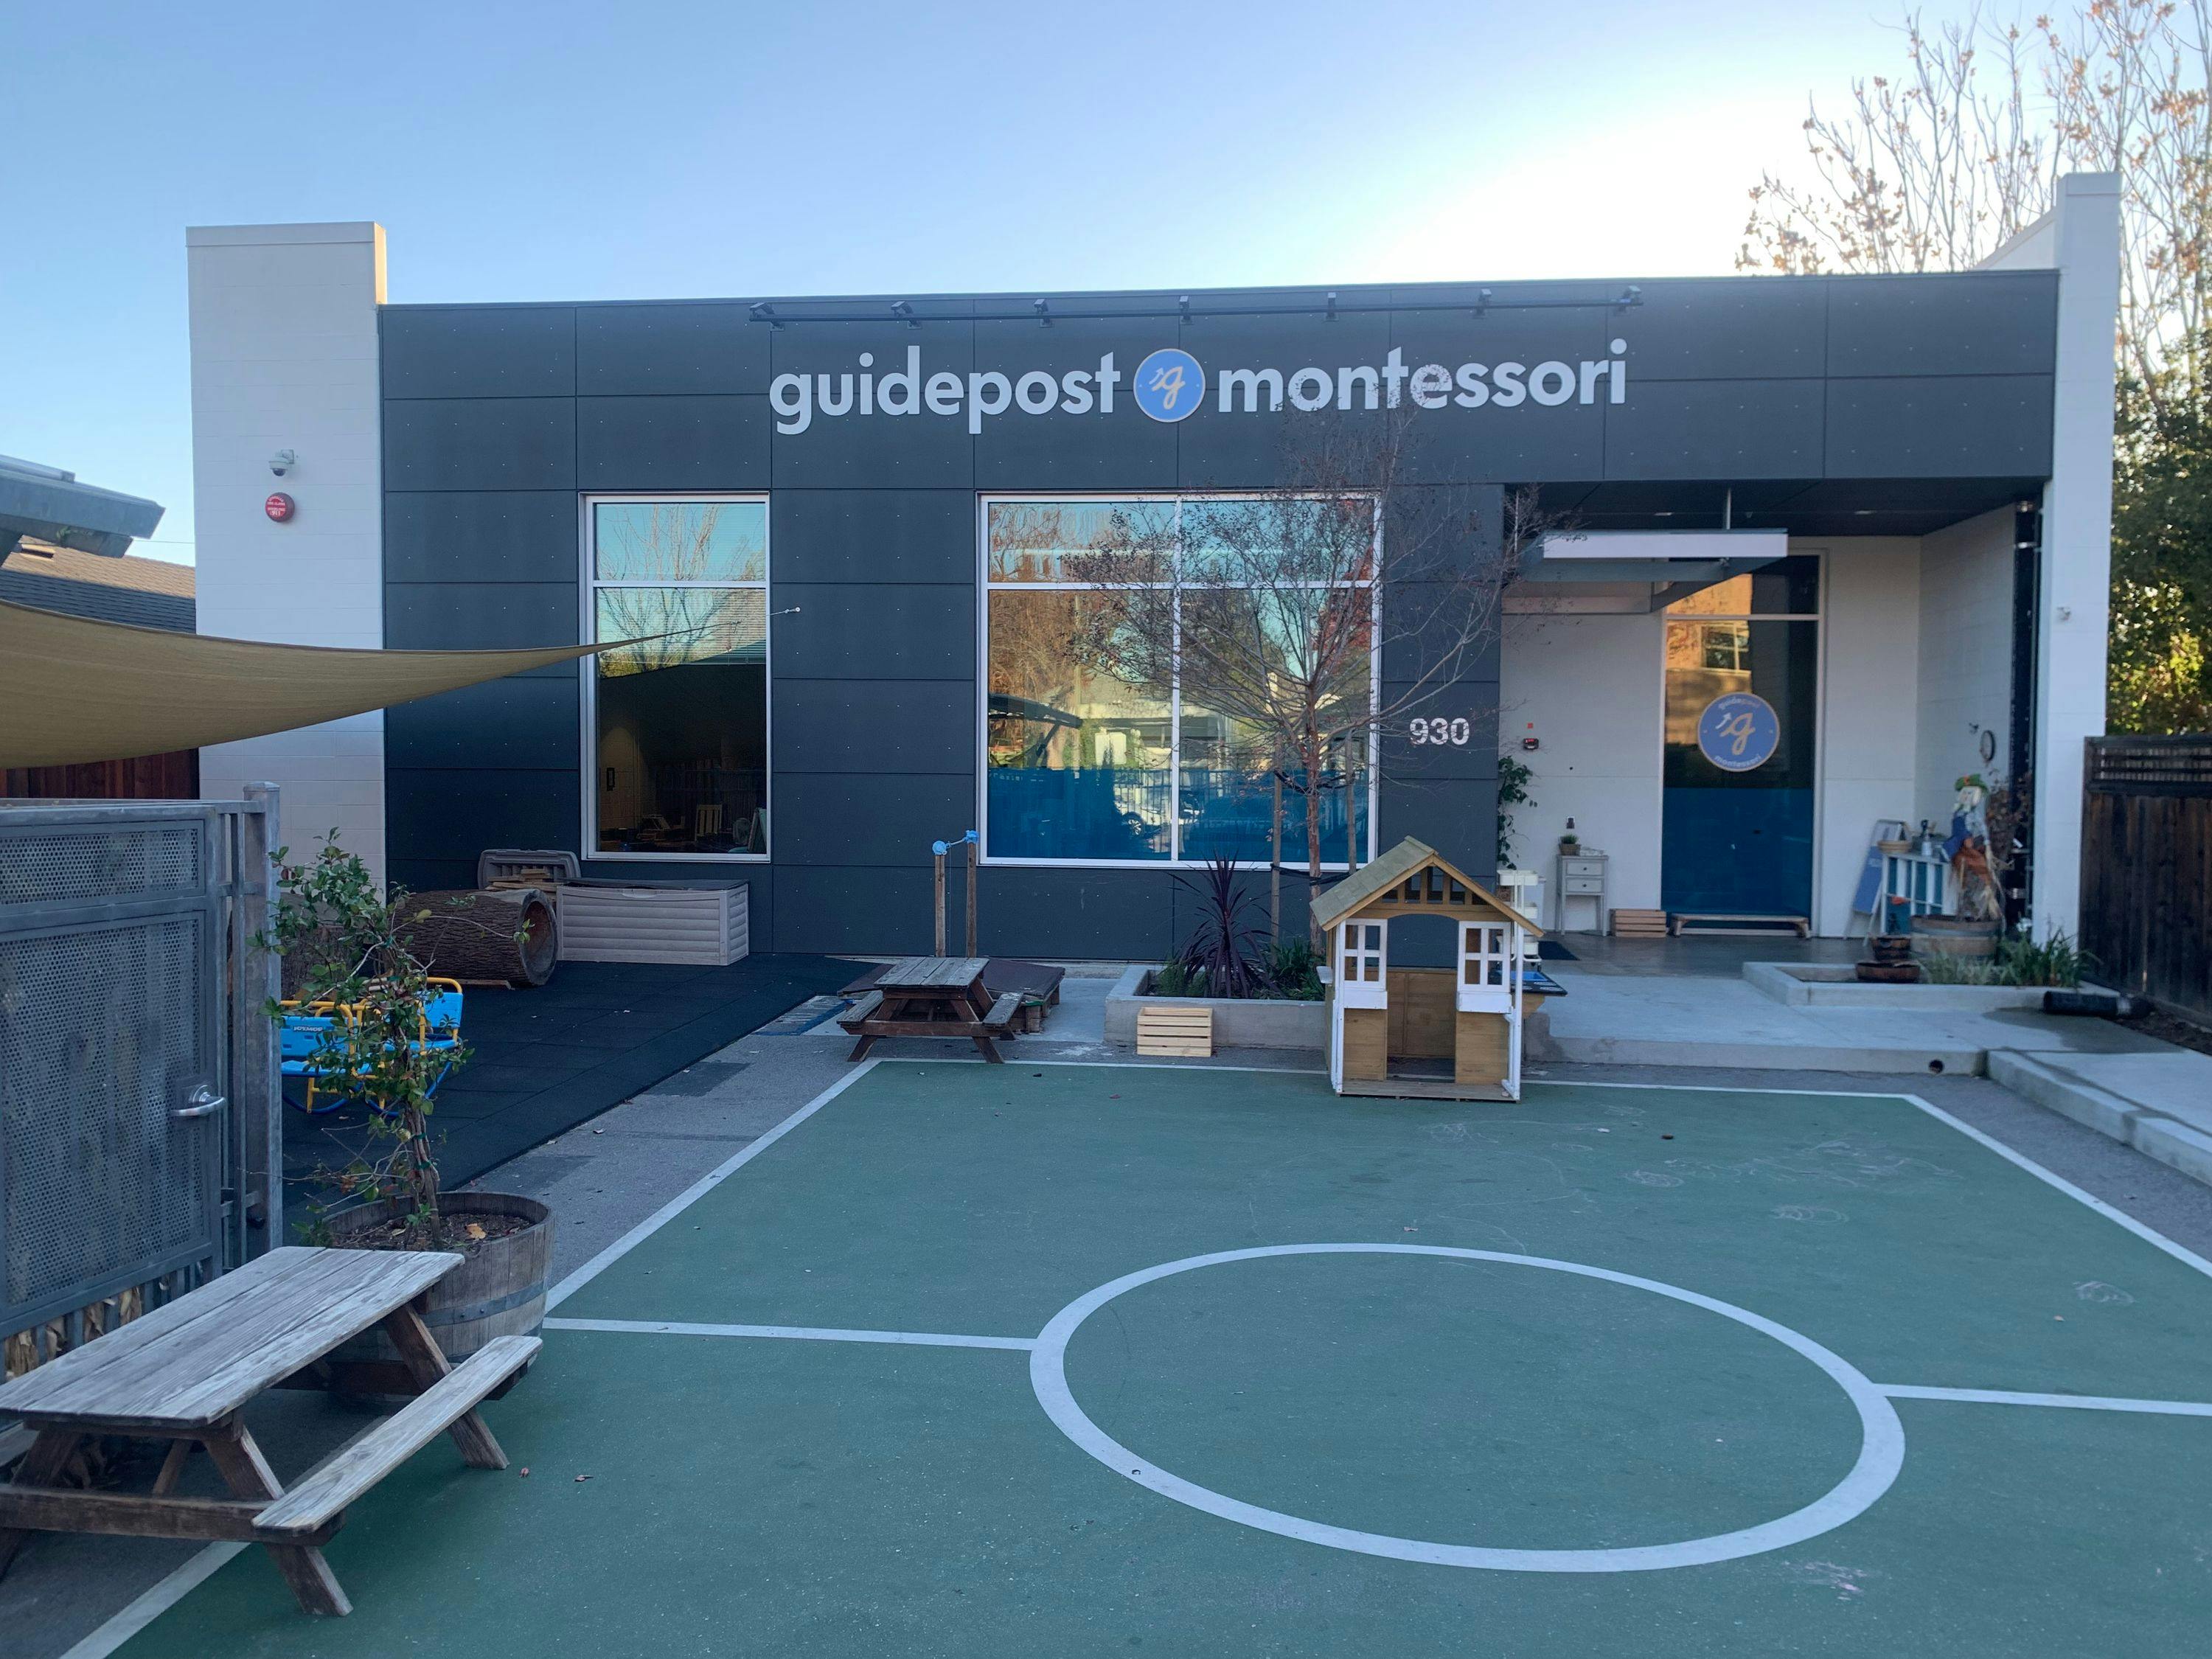 View into the backyard playground of Guidepost Montessori at Palo Alto that shows the gray exterior with a branded Guidepost Montessori sign over outward facing windows.